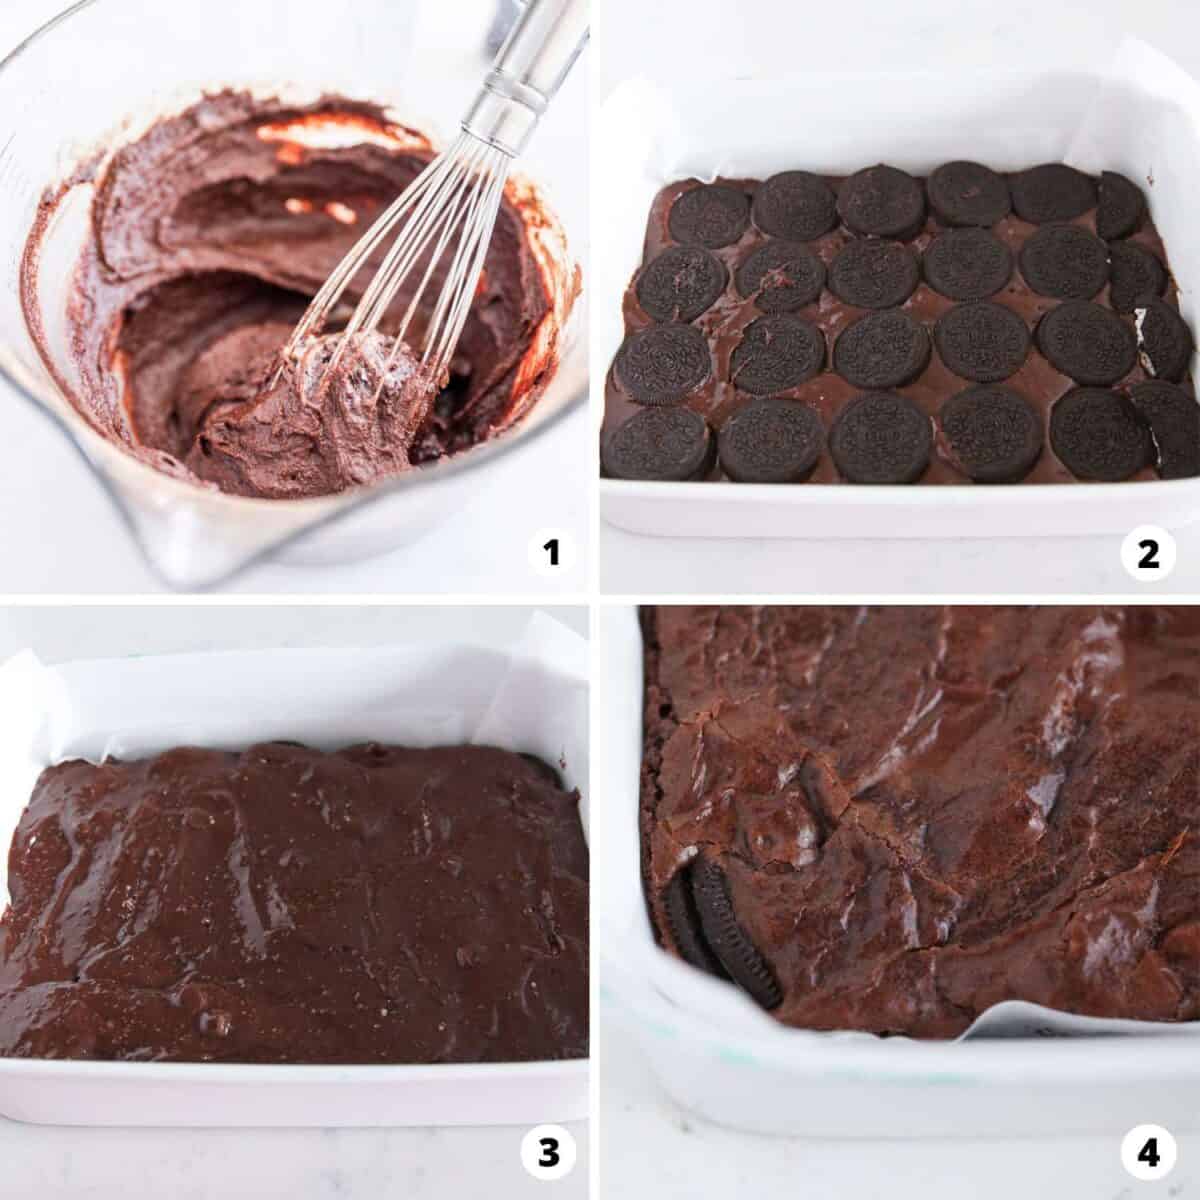 Showing how to make oreo brownies in a 4 step collage.